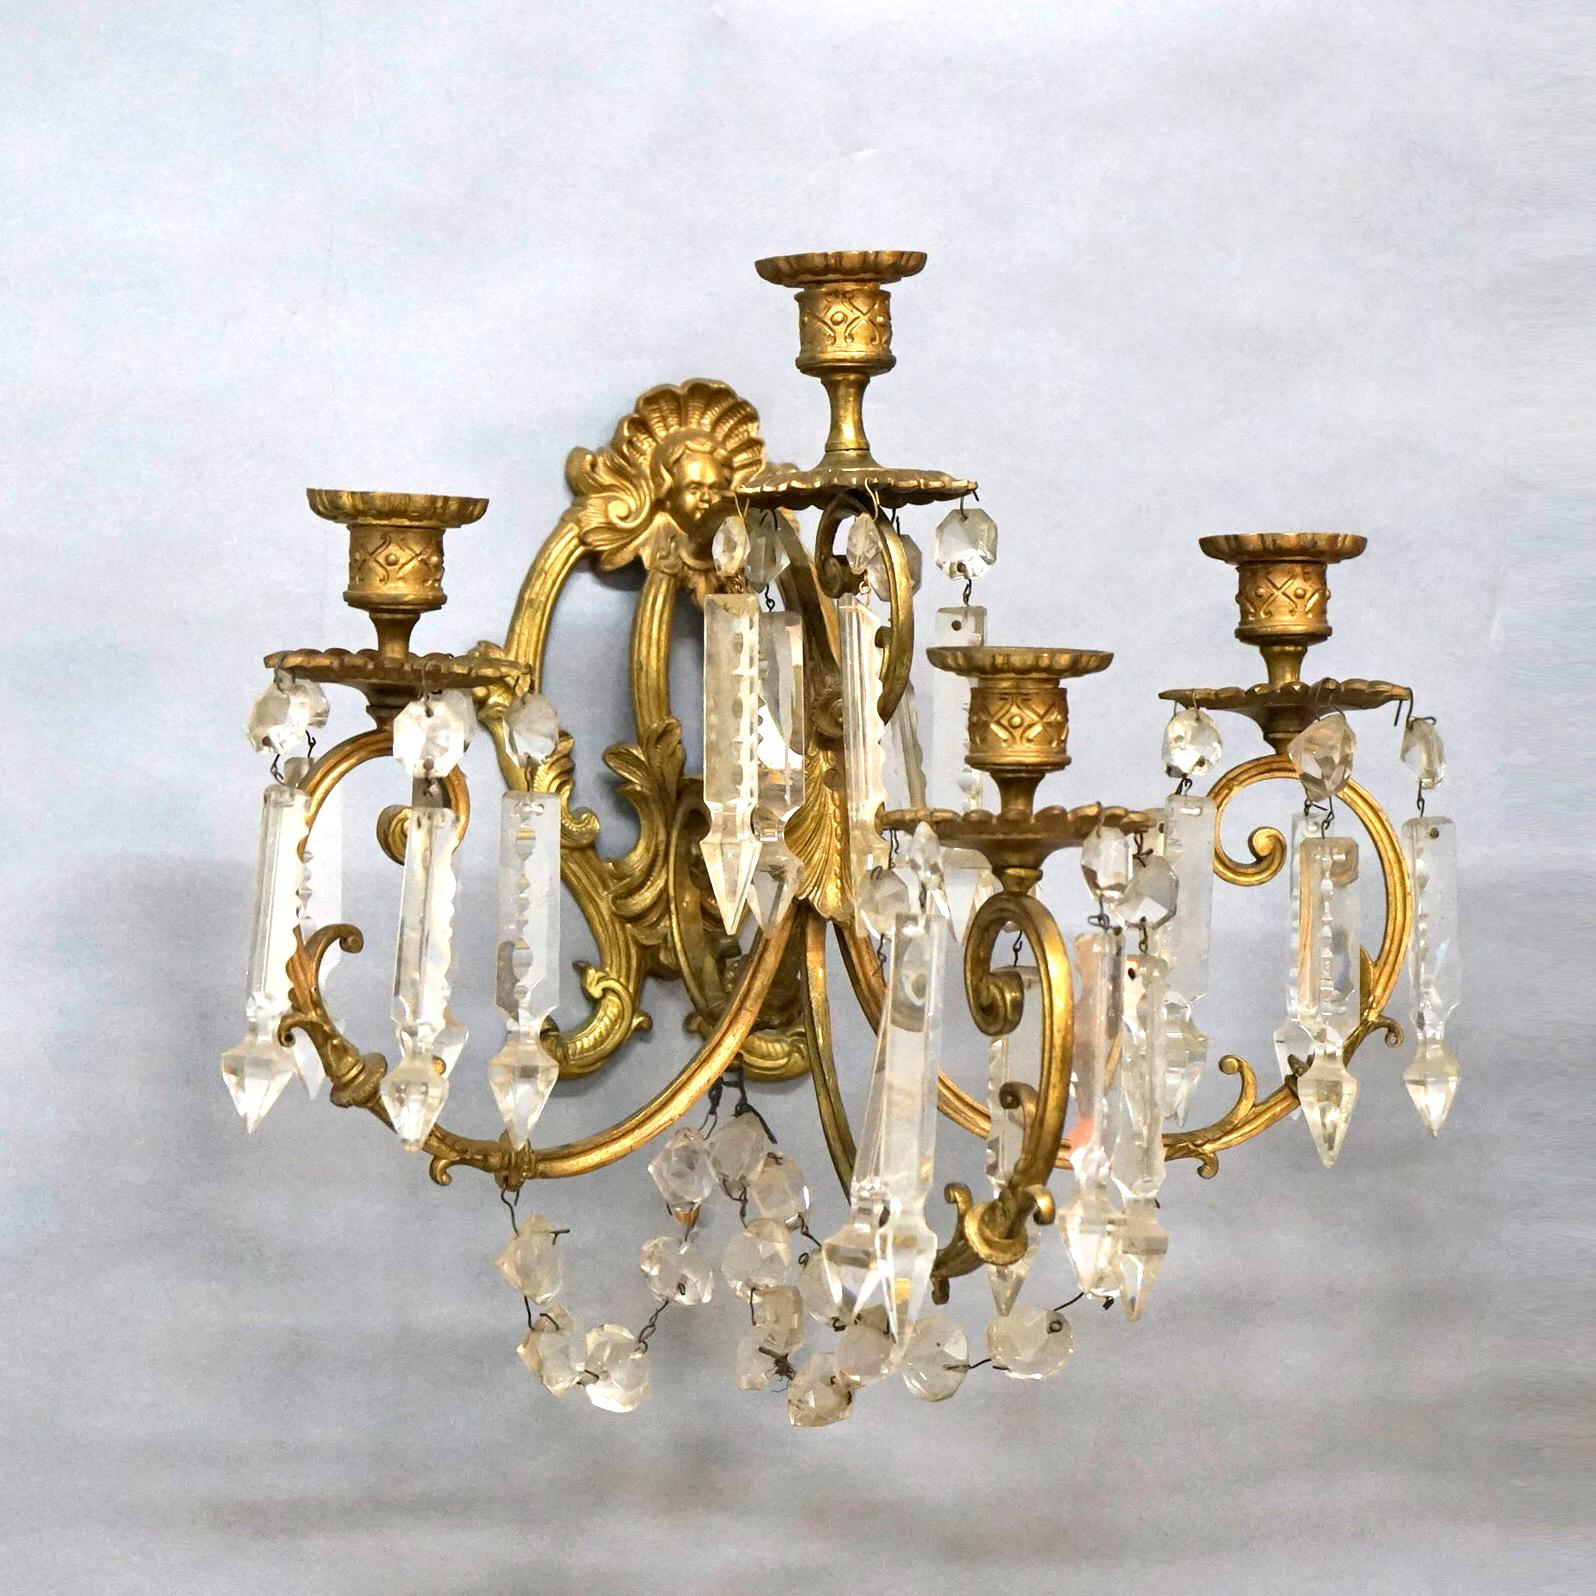 19th Century Antique Classical French Gilt Bronze & Cut Crystal Four-Arm Candle Sconces 19thC